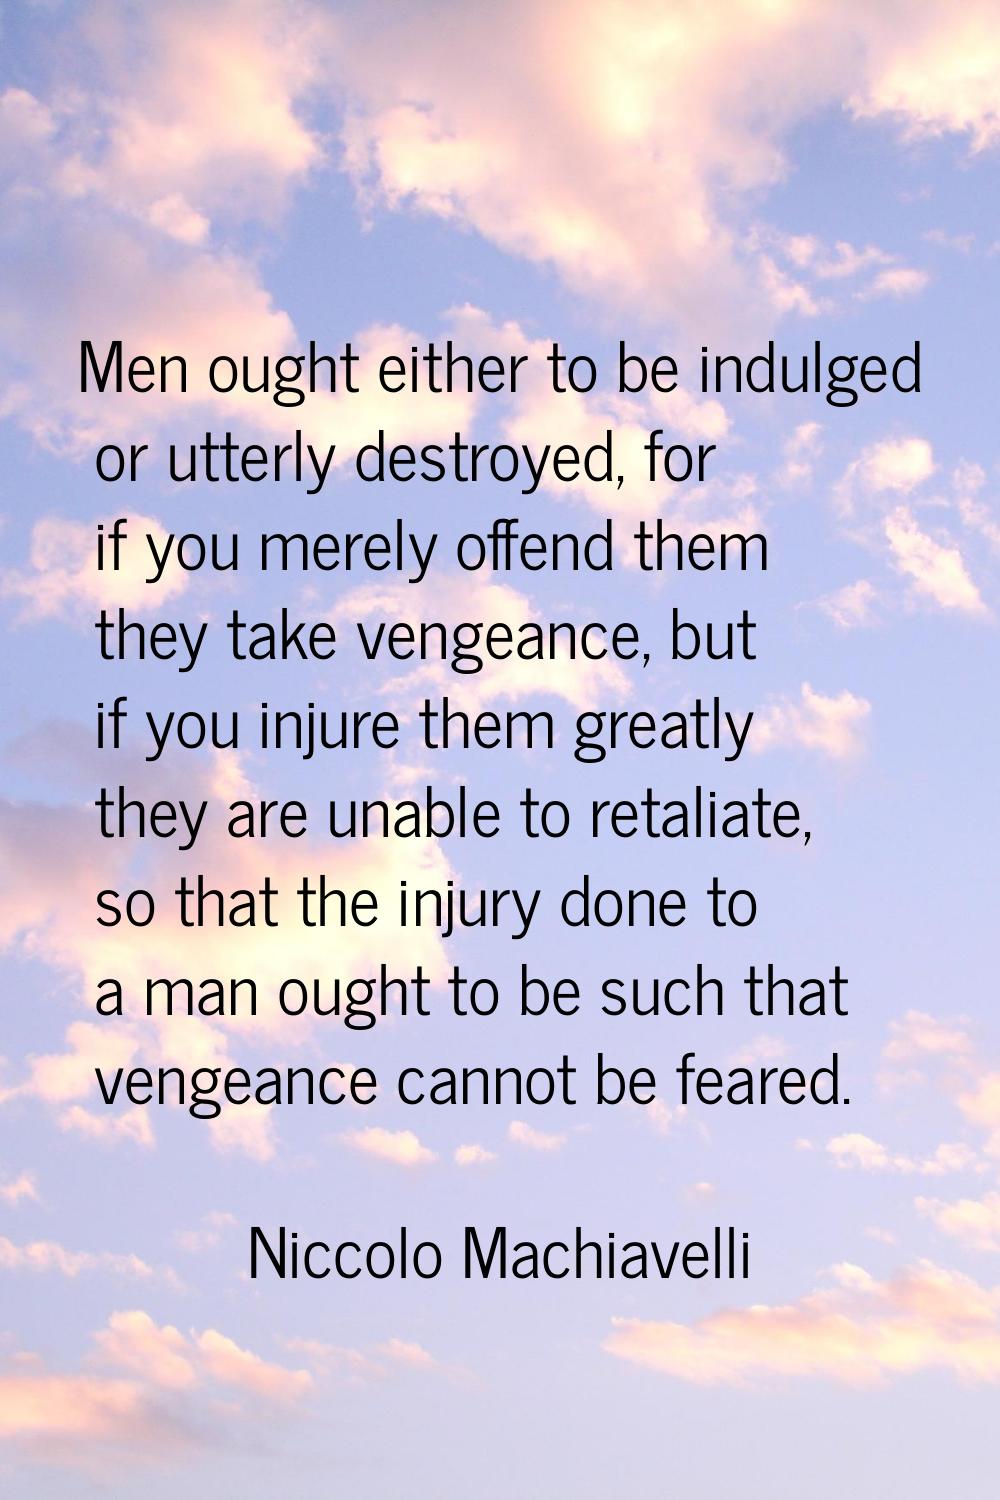 Men ought either to be indulged or utterly destroyed, for if you merely offend them they take venge